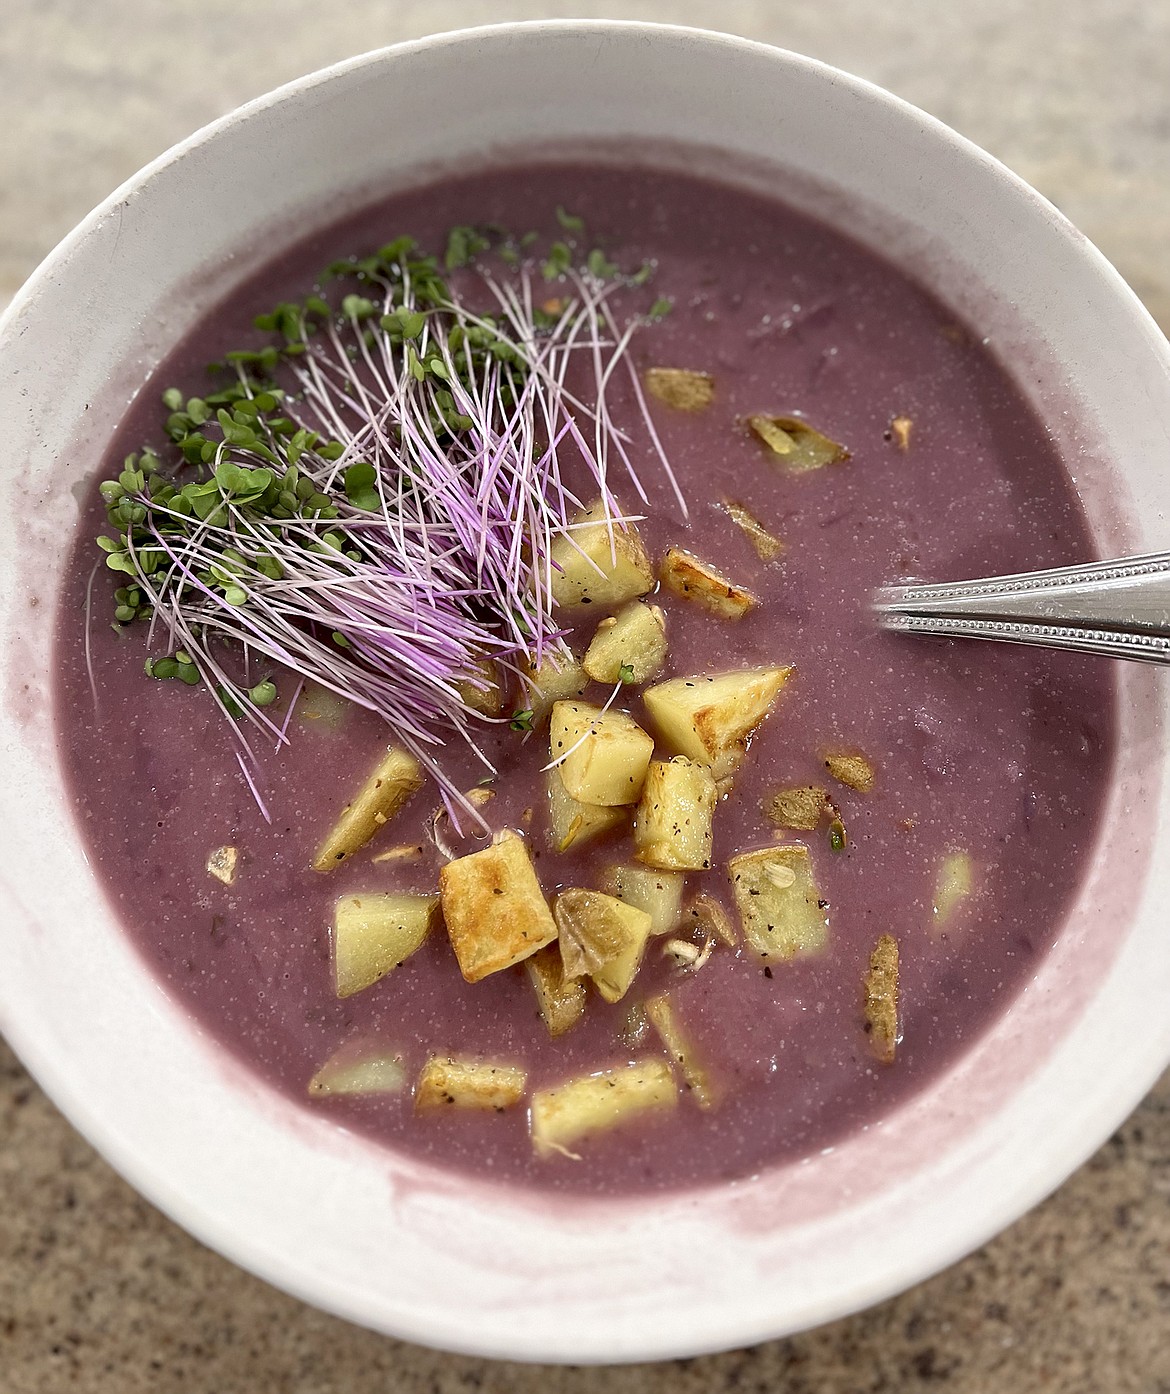 Chef Lohof's purple cabbage potato soup topped with kohlrabi micro greens from the local Gecko Farms. (Photo by Lohof)